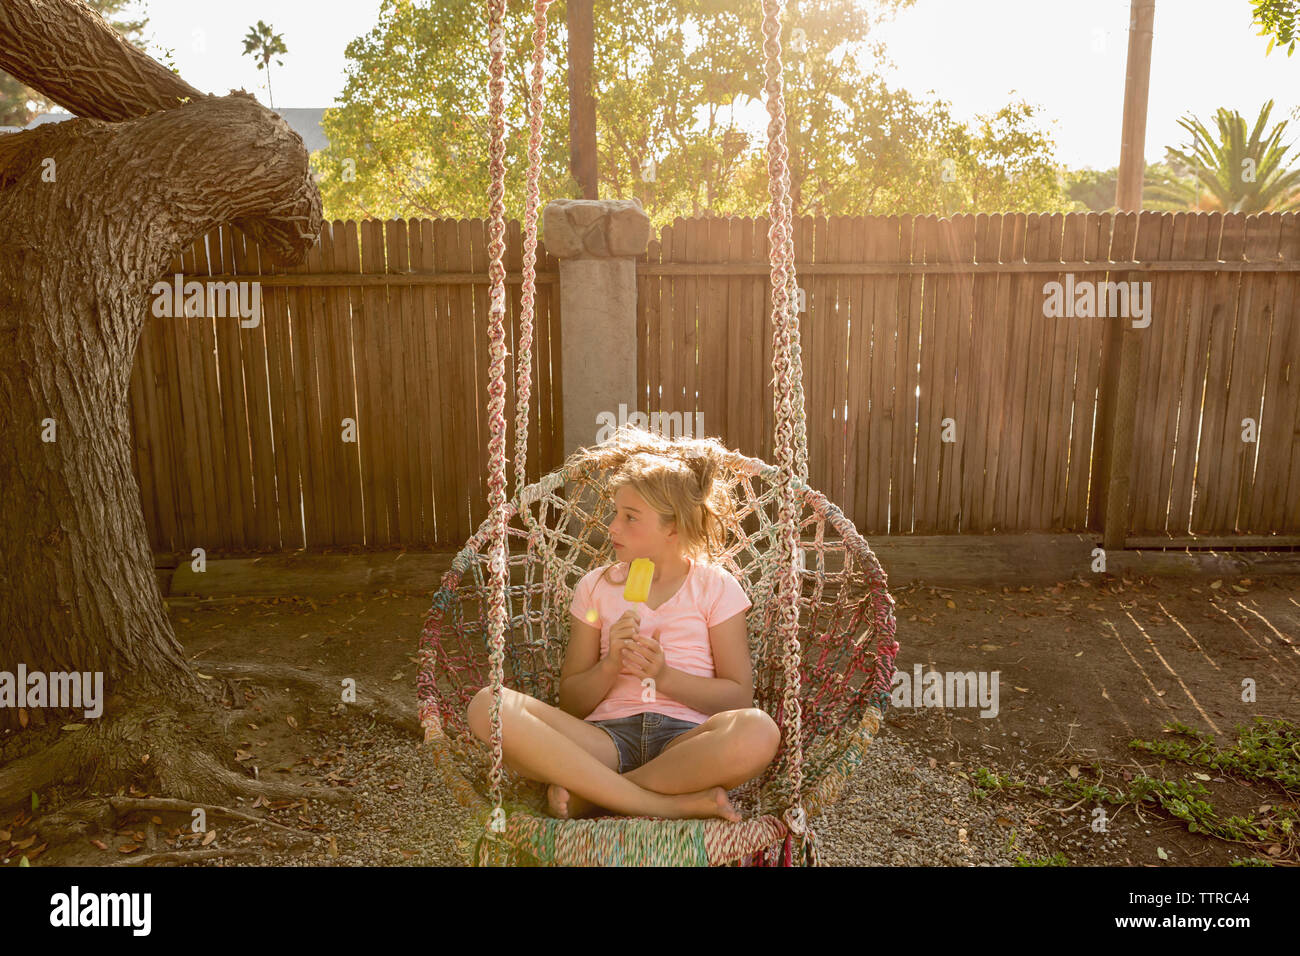 Girl looking away while holding popsicle on swing Stock Photo